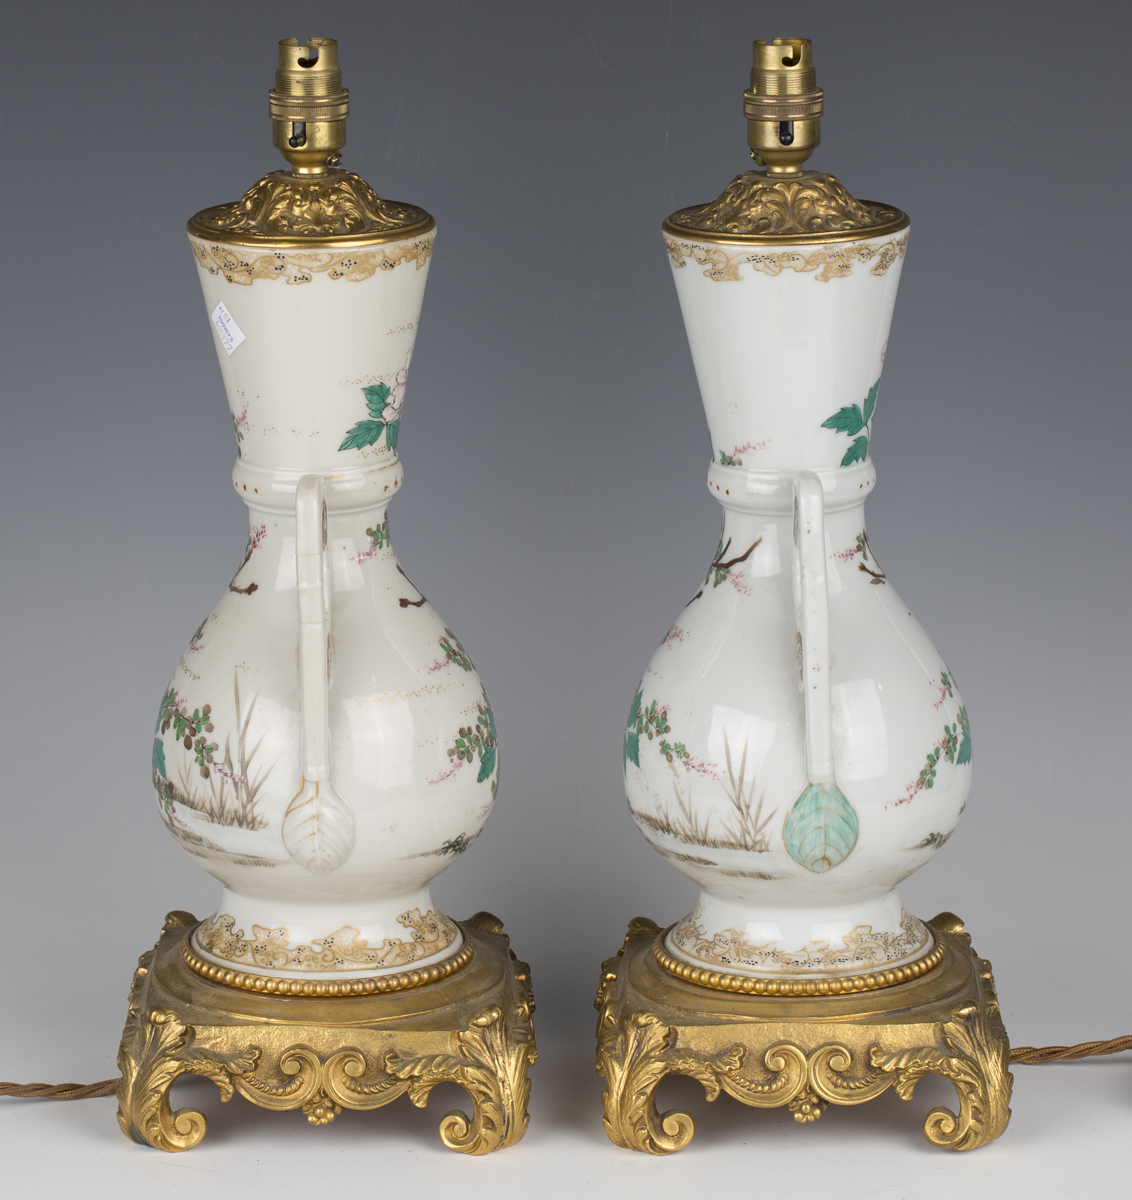 A pair of late 19th century Japanese export porcelain and ormolu mounted table lamps, the twin- - Image 2 of 7